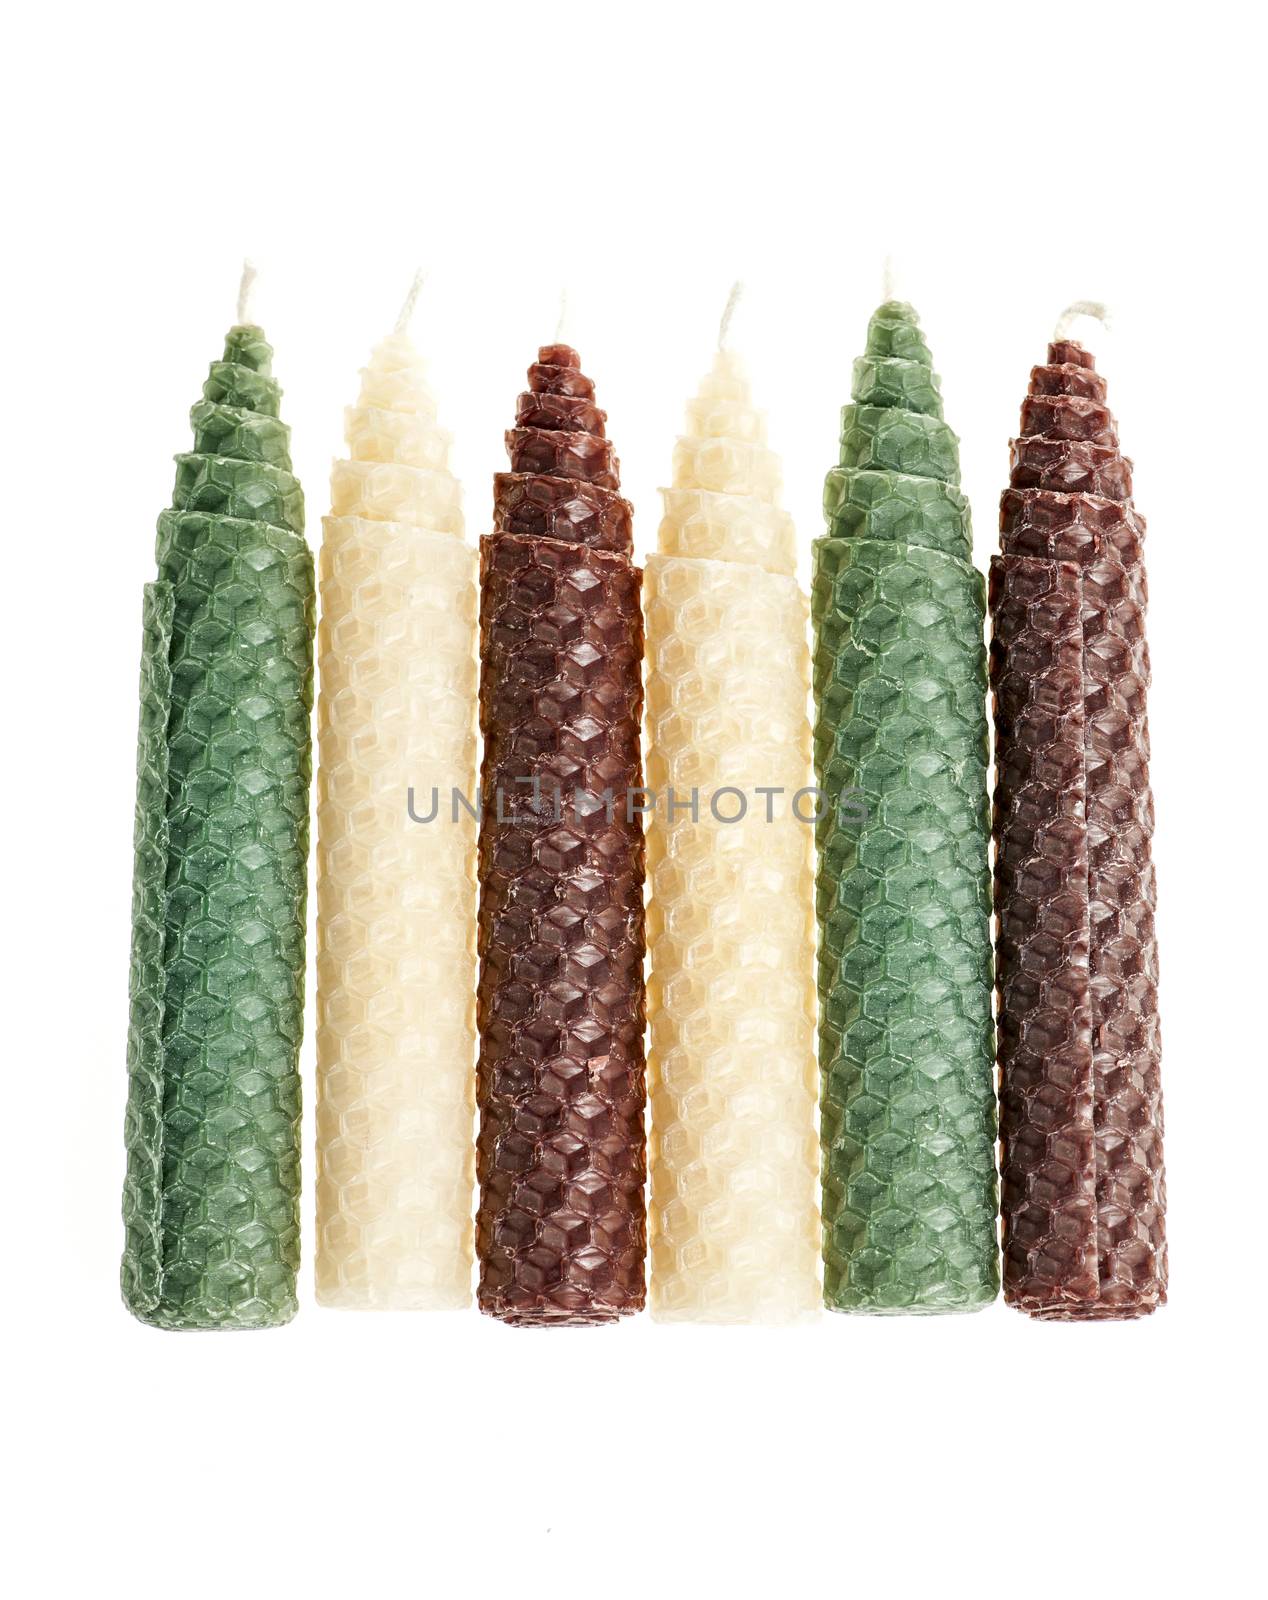 Colorful beeswax candles isolated on white background